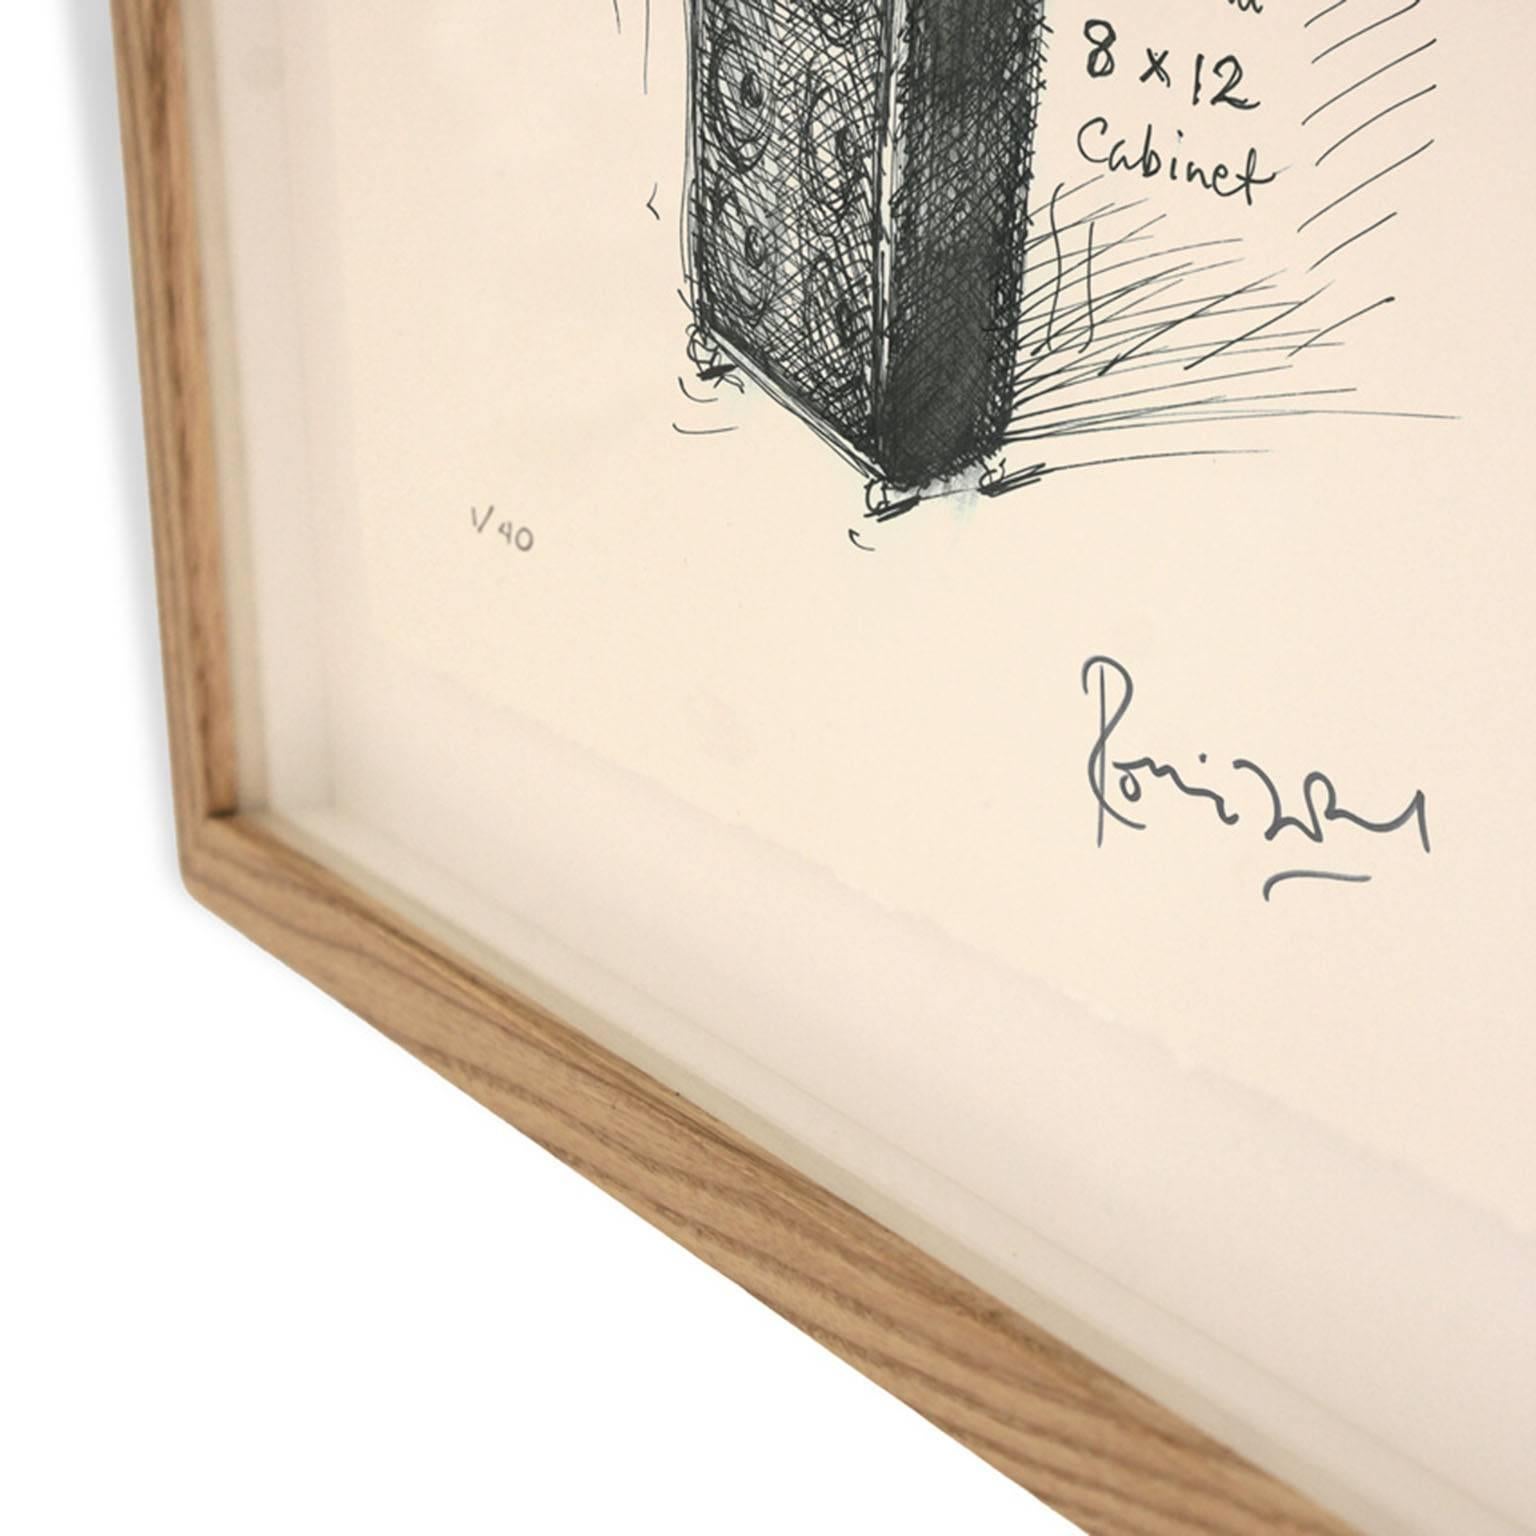 Ronnie Wood has created a series of new drawings inspired by the content of his recently discovered 1965 diary. Eight are available as individual signed artworks.

Ronnie Wood: 'I just closed my eyes, opened them, and drew what was photographically